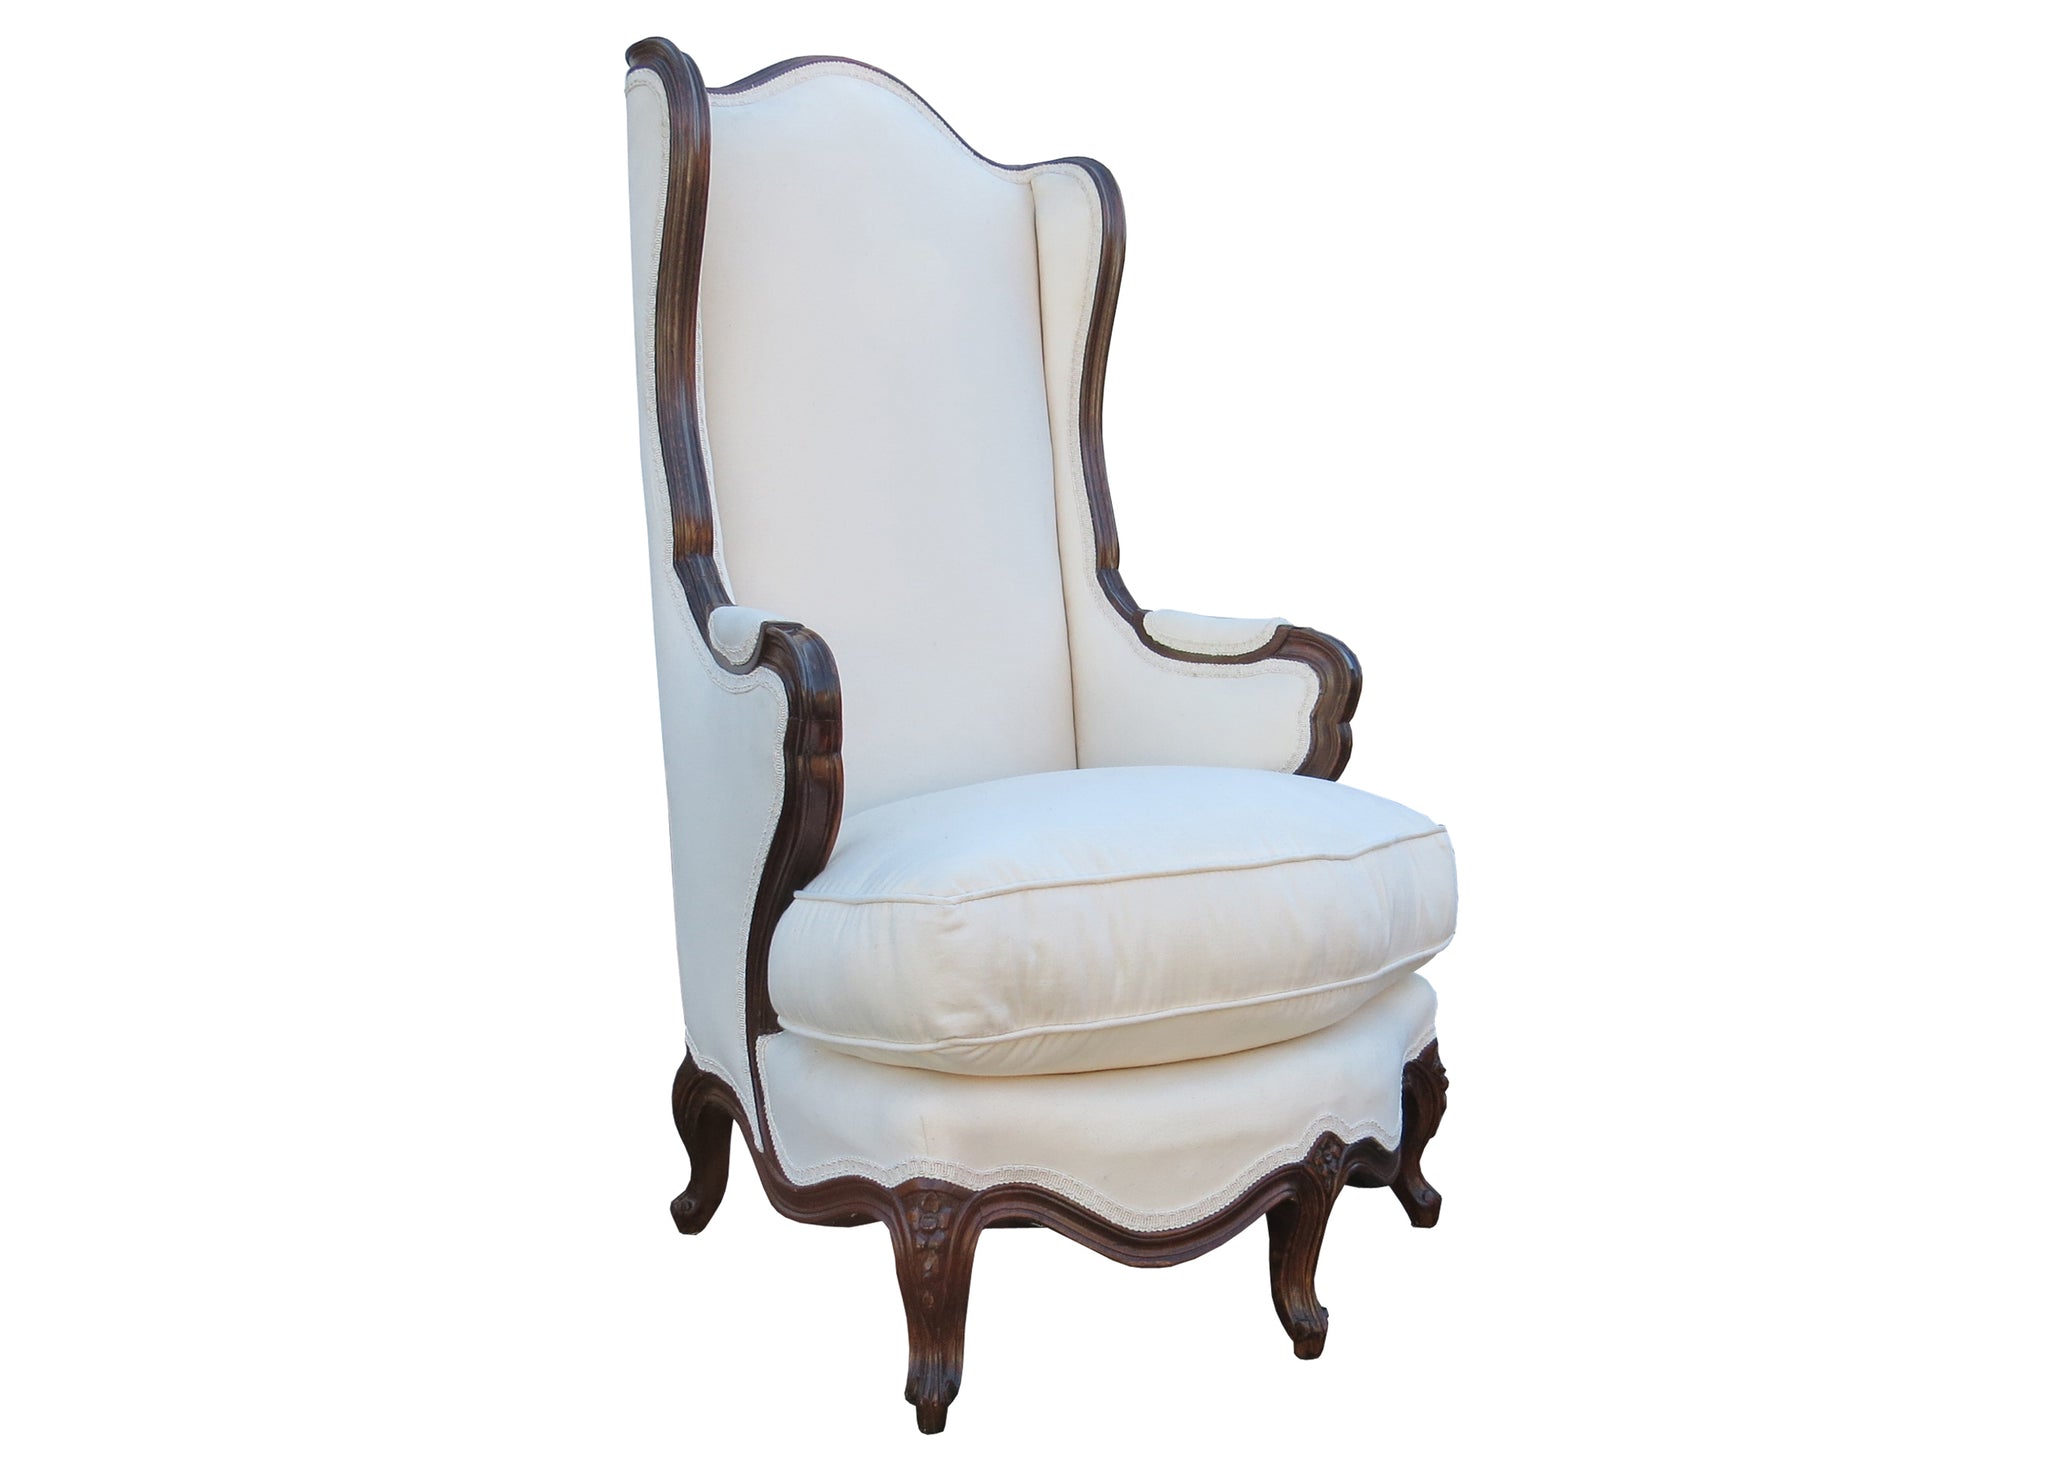 Antique French Louis XV style wingback chair.